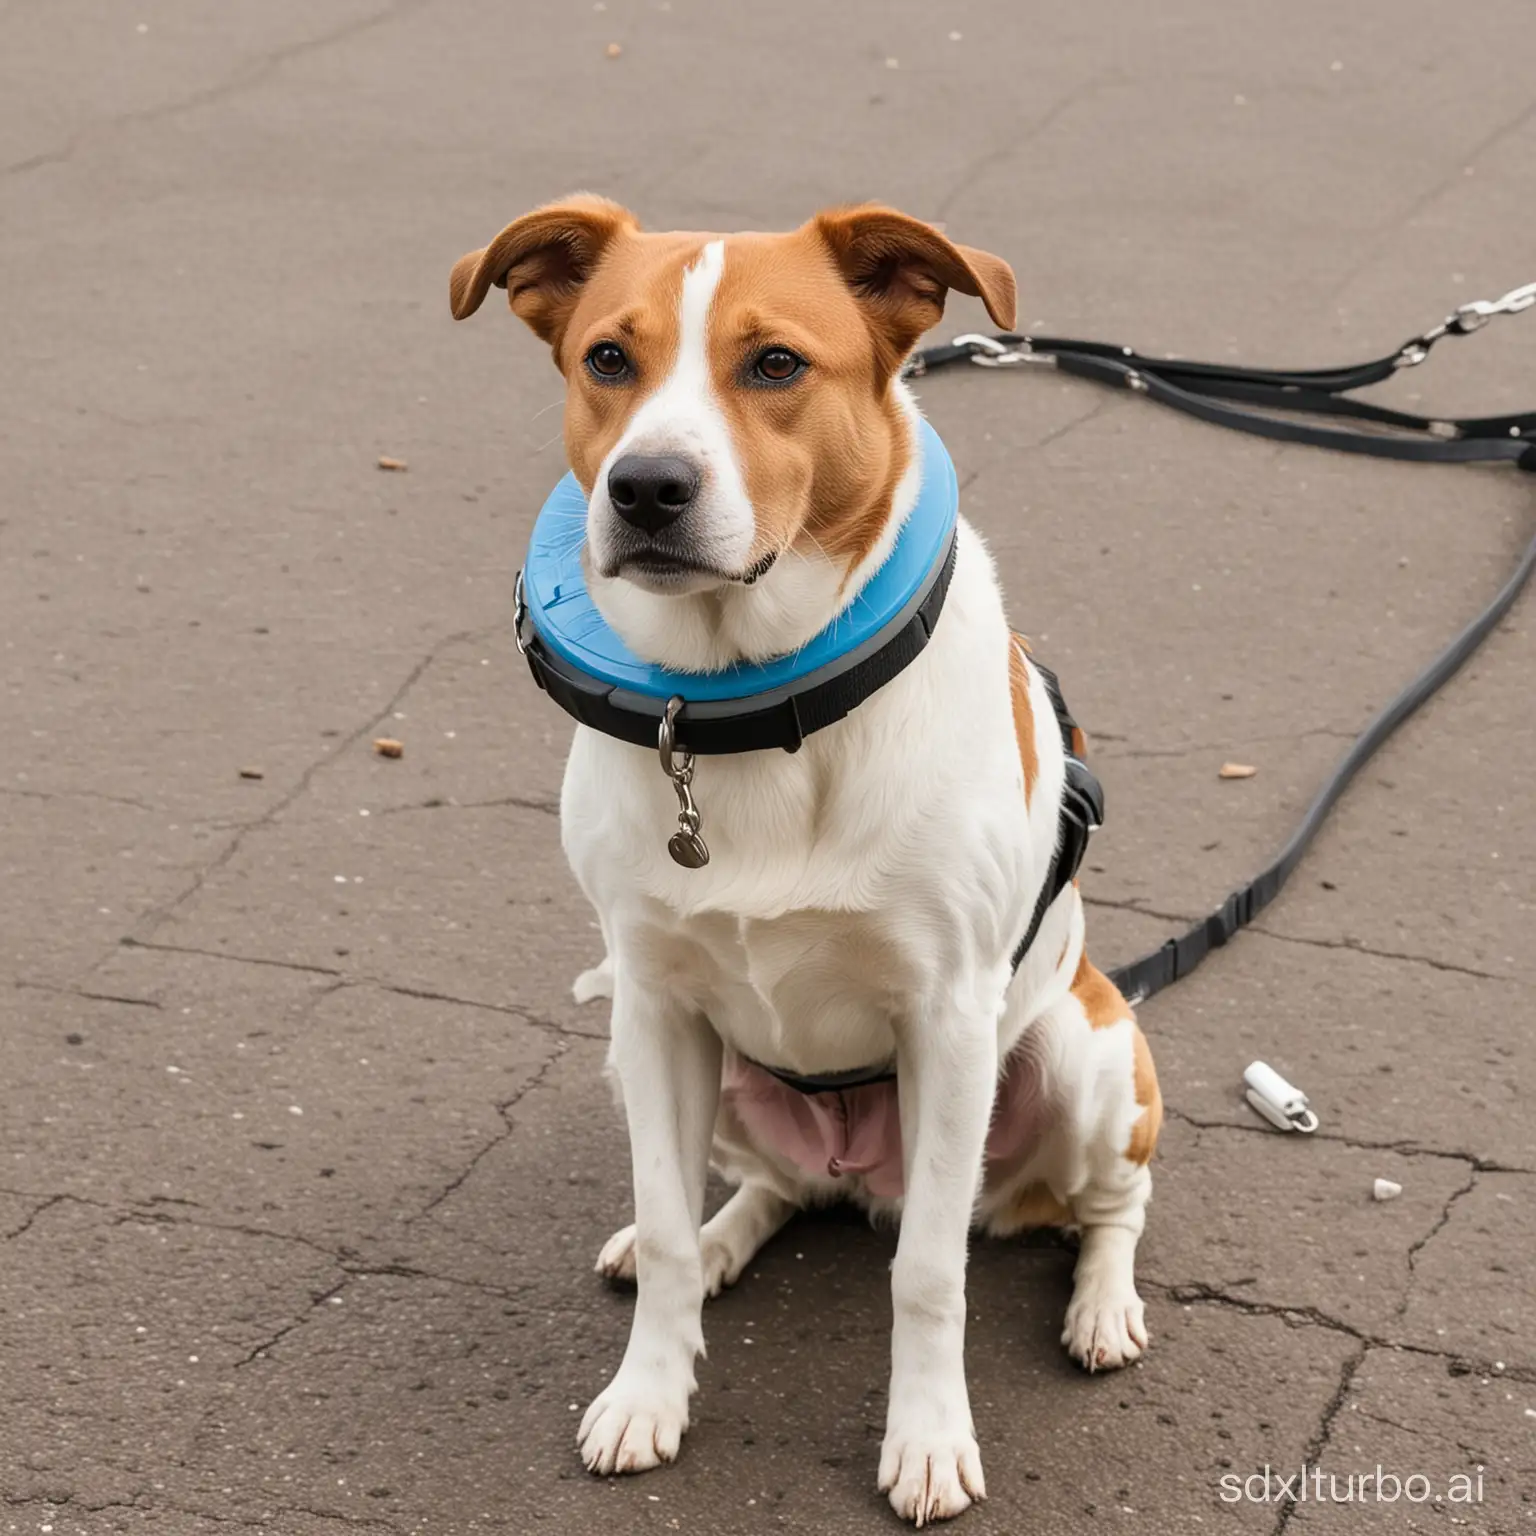 A sick dog carrying a recovery collar around his neck.